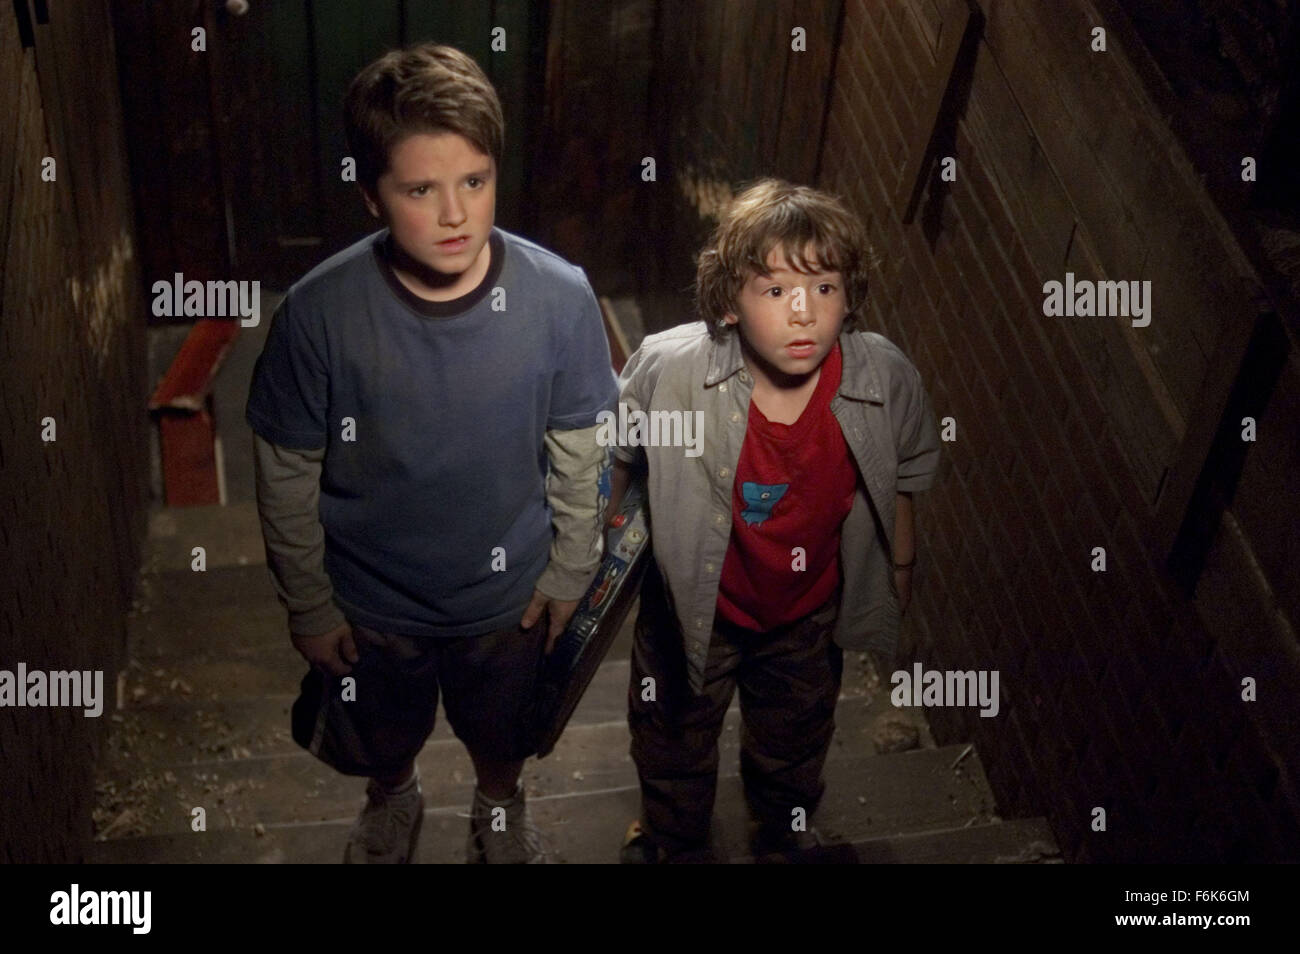 RELEASE DATE: November 11, 2005. MOVIE TITLE: Zathura: A Space Adventure. STUDIO: Columbia Pictures. PLOT: Two young brothers are drawn into an intergalactic adventure when their house is magically hurtled through space because of the board game they are playing. PICTURED: JOSH HUTCHERSON as Walter Budwing and JONAH BOBO as Danny Budwing. Stock Photo